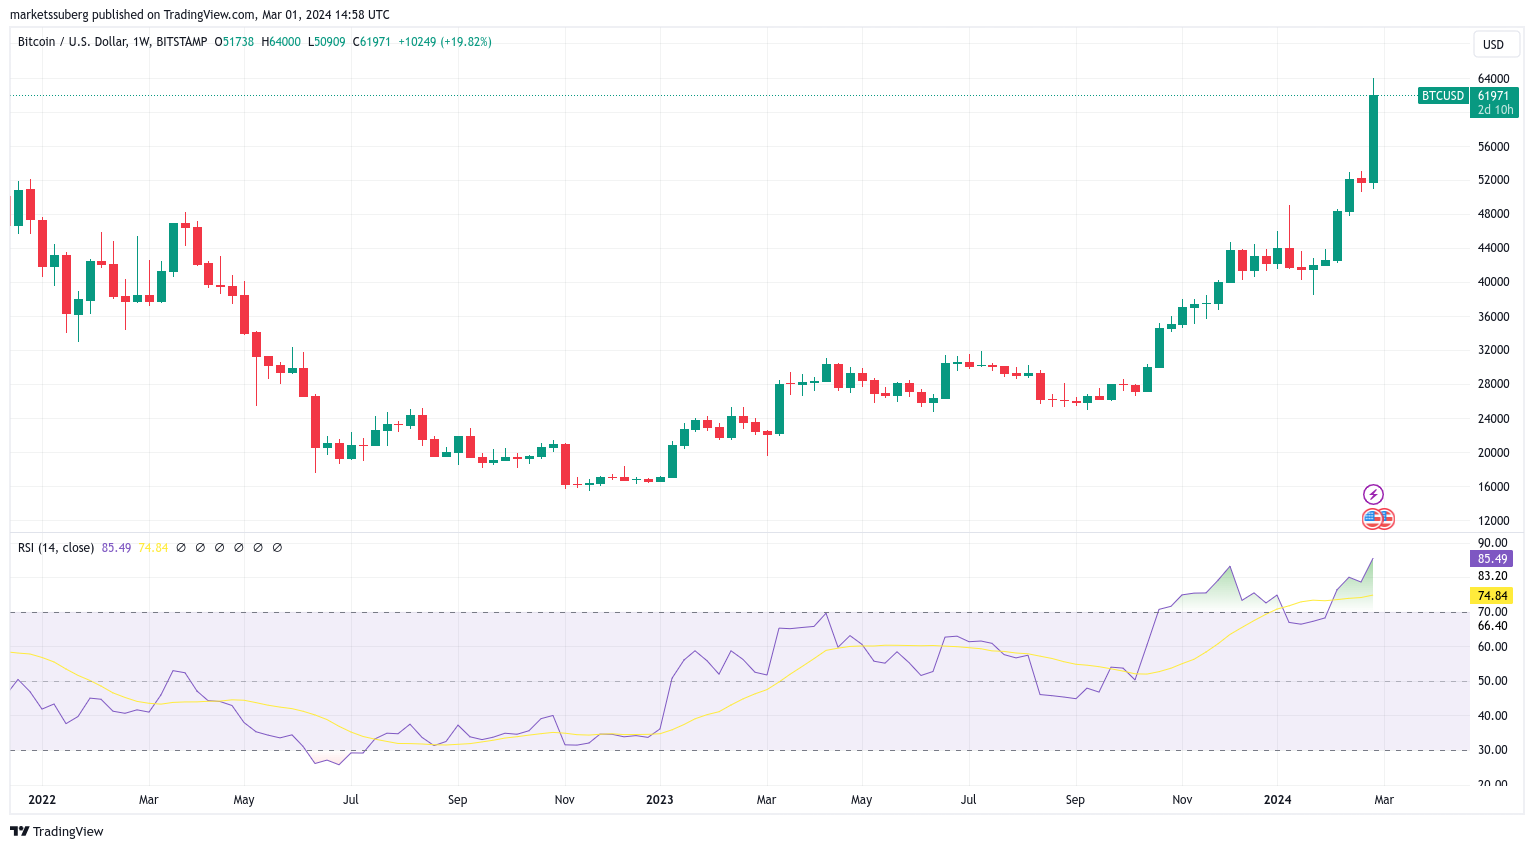 BTC/USD 1-week chart with RSI